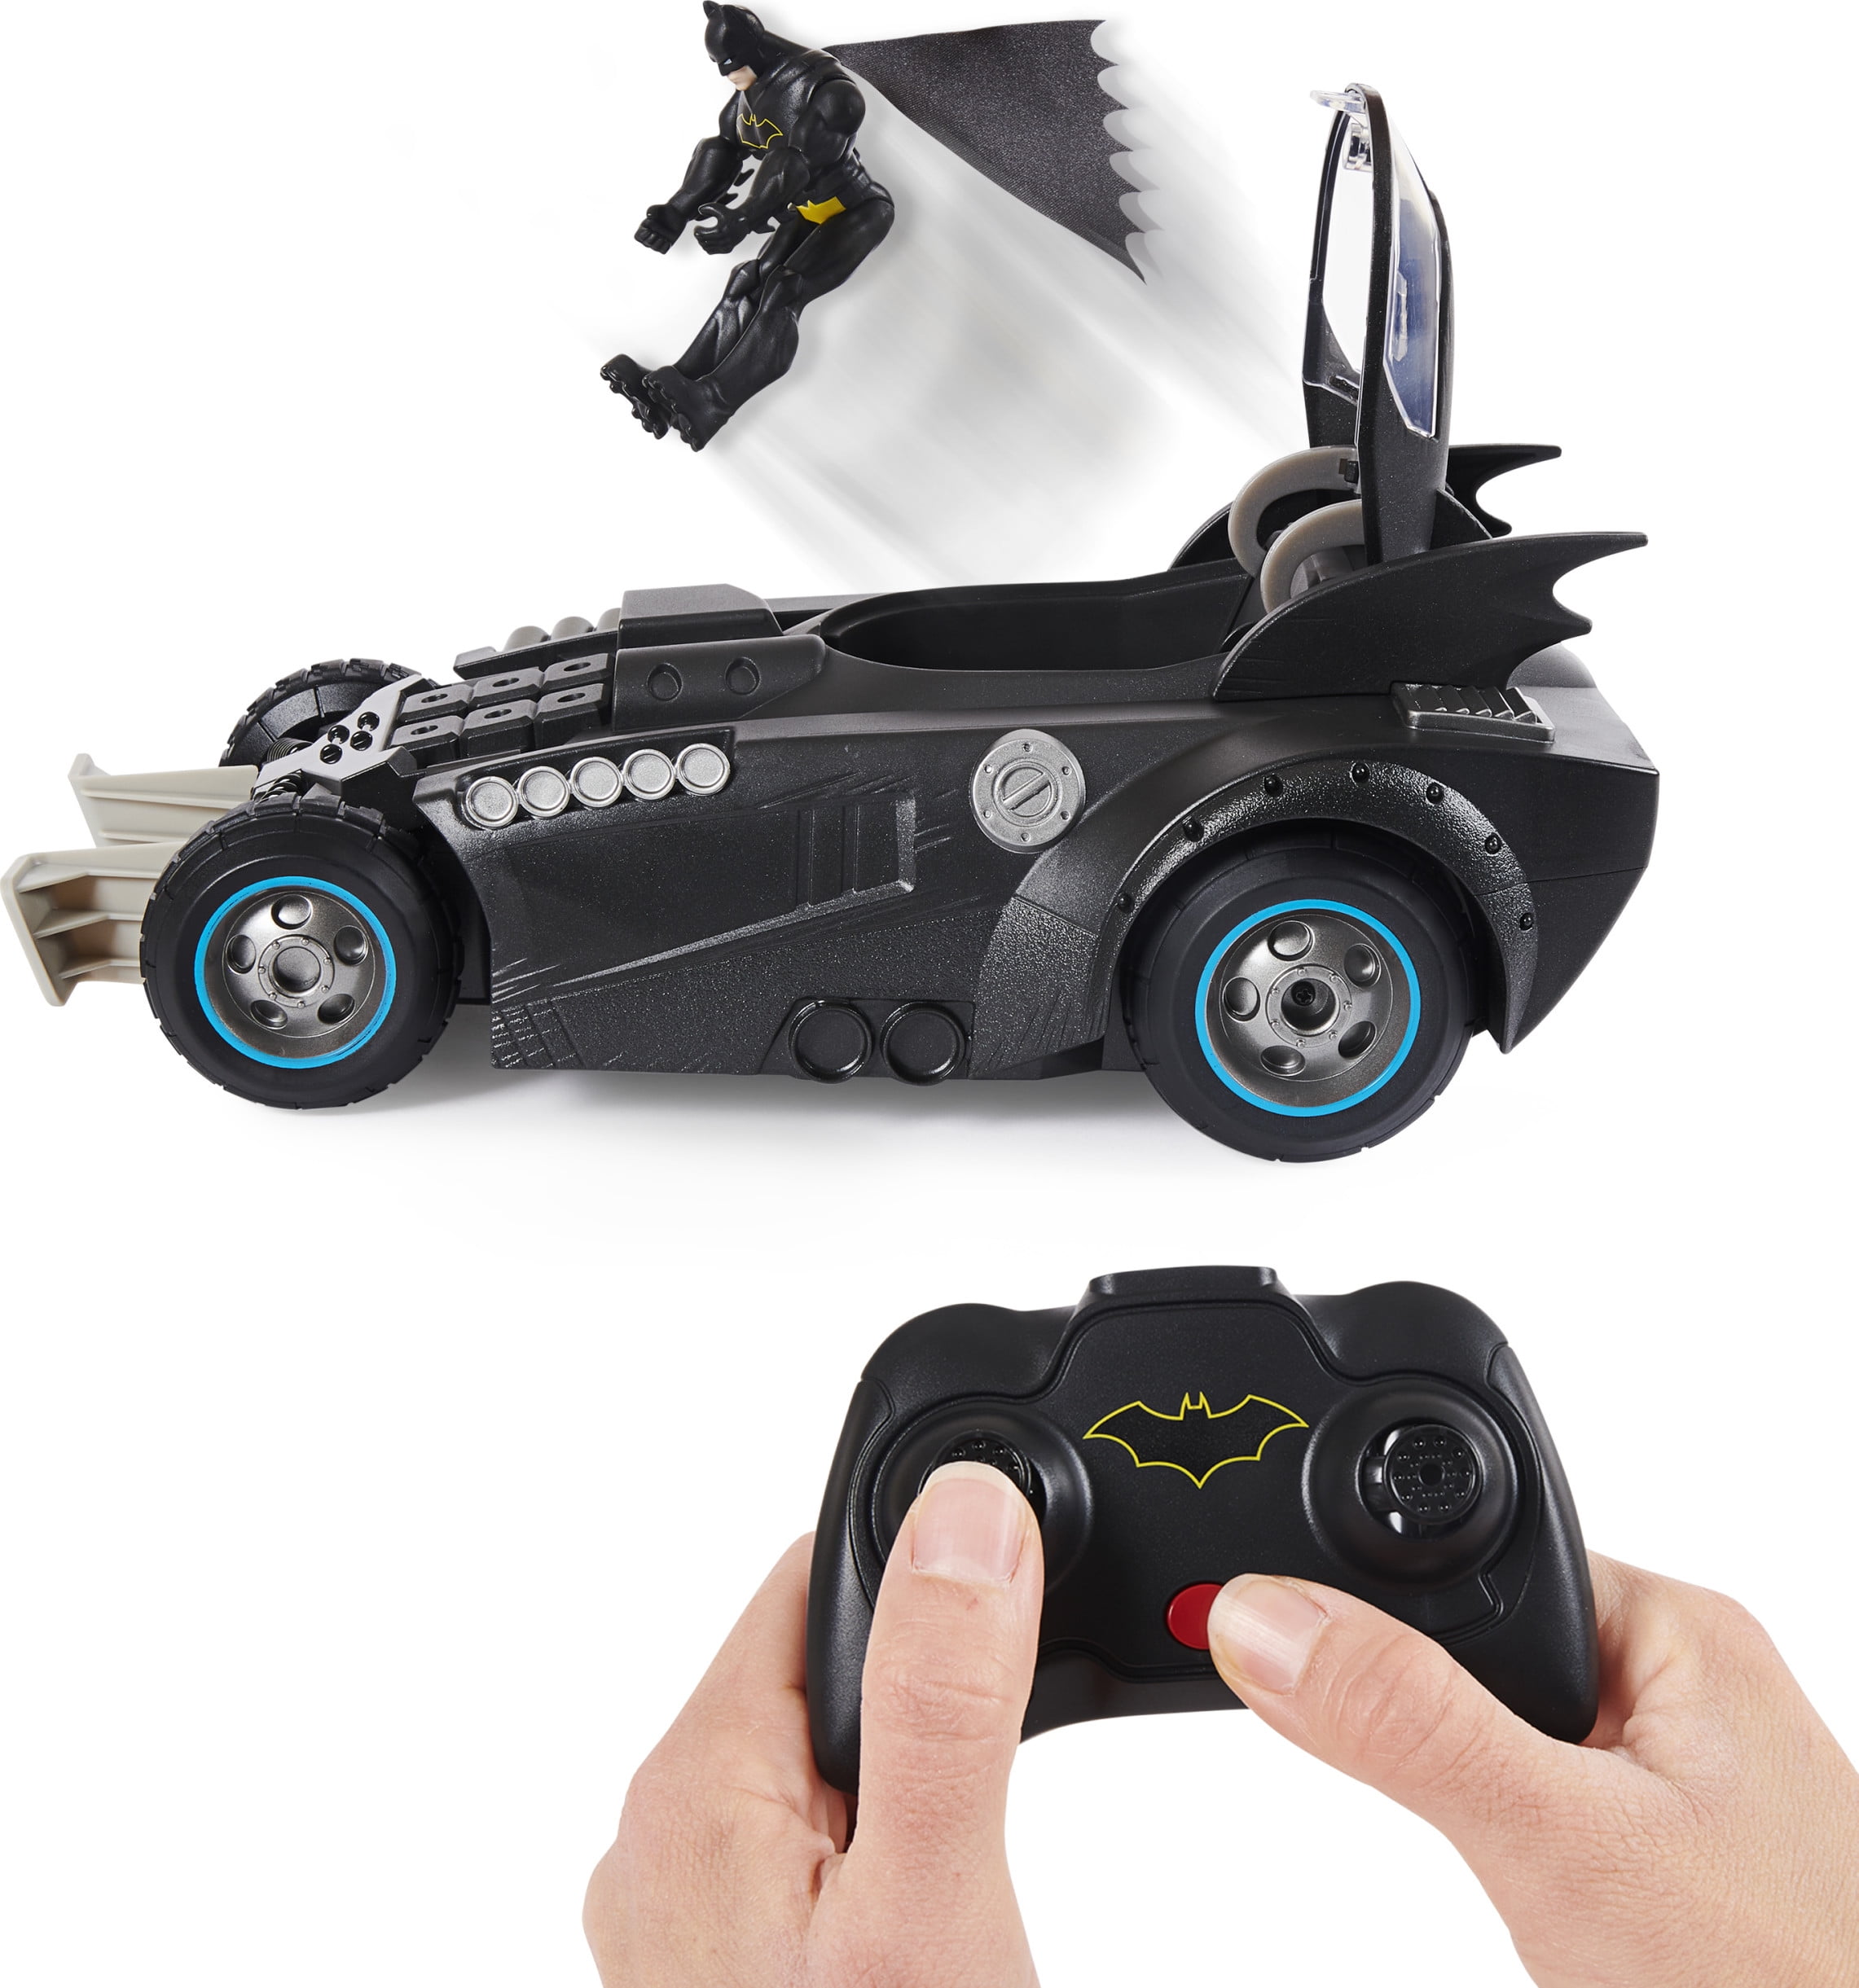 Batman Launch and Defend Batmobile Remote Control Vehicle with Exclusive  4-inch Batman Figure, Kids Toys for Boys 